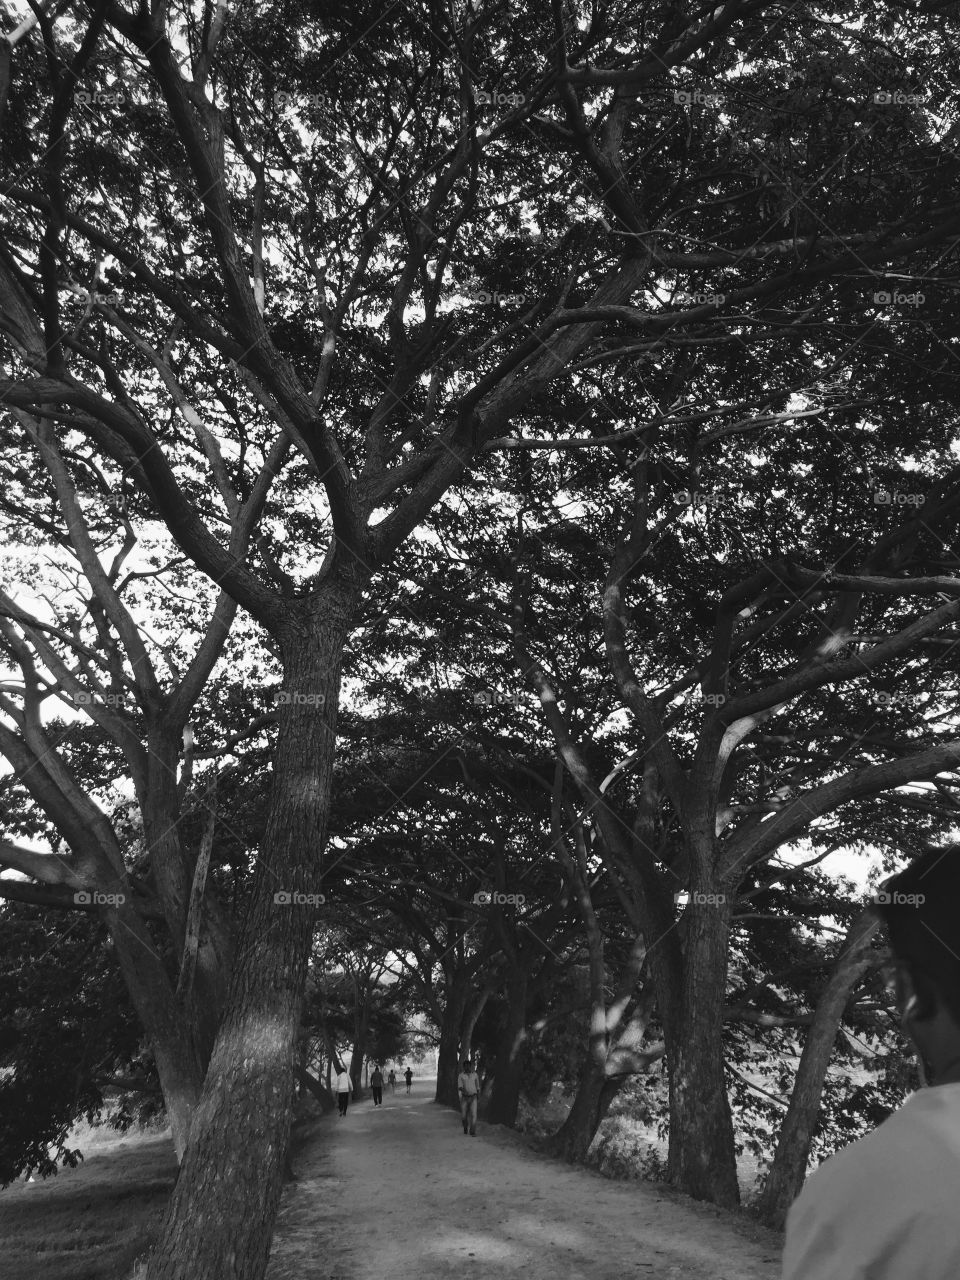 Black and white speaks the future of trees